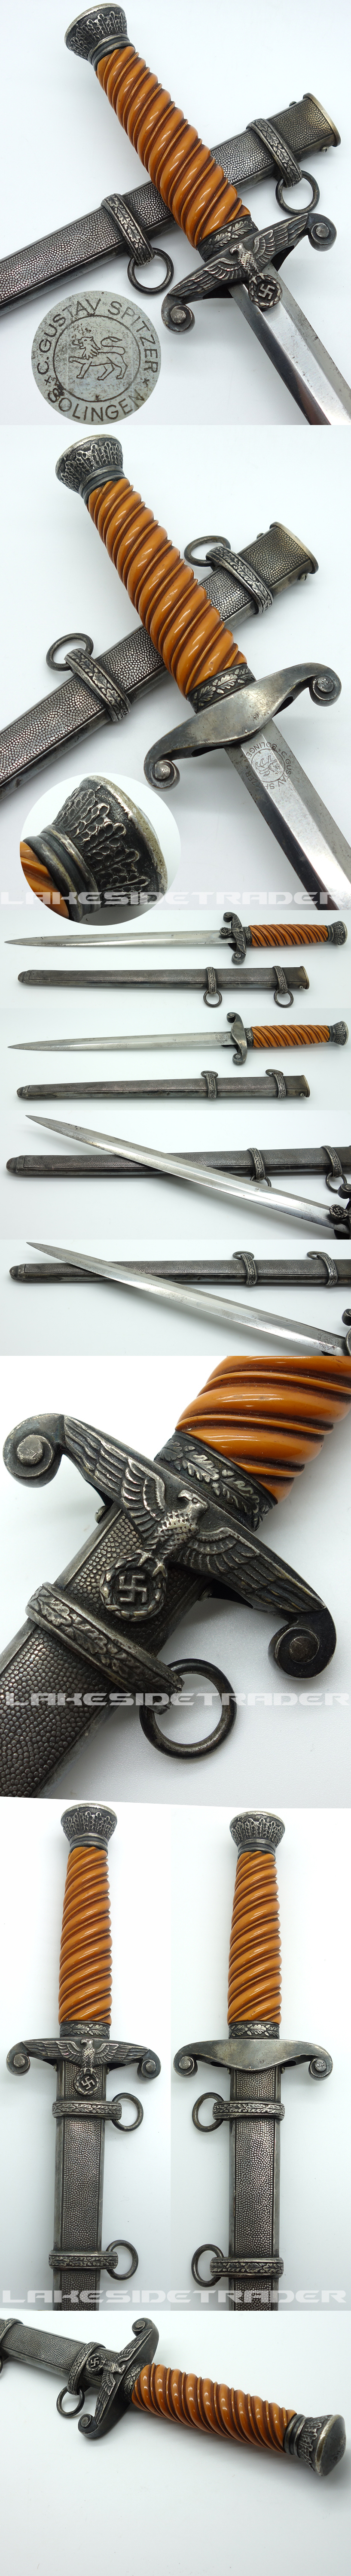 Early Army Dagger by Spitzer